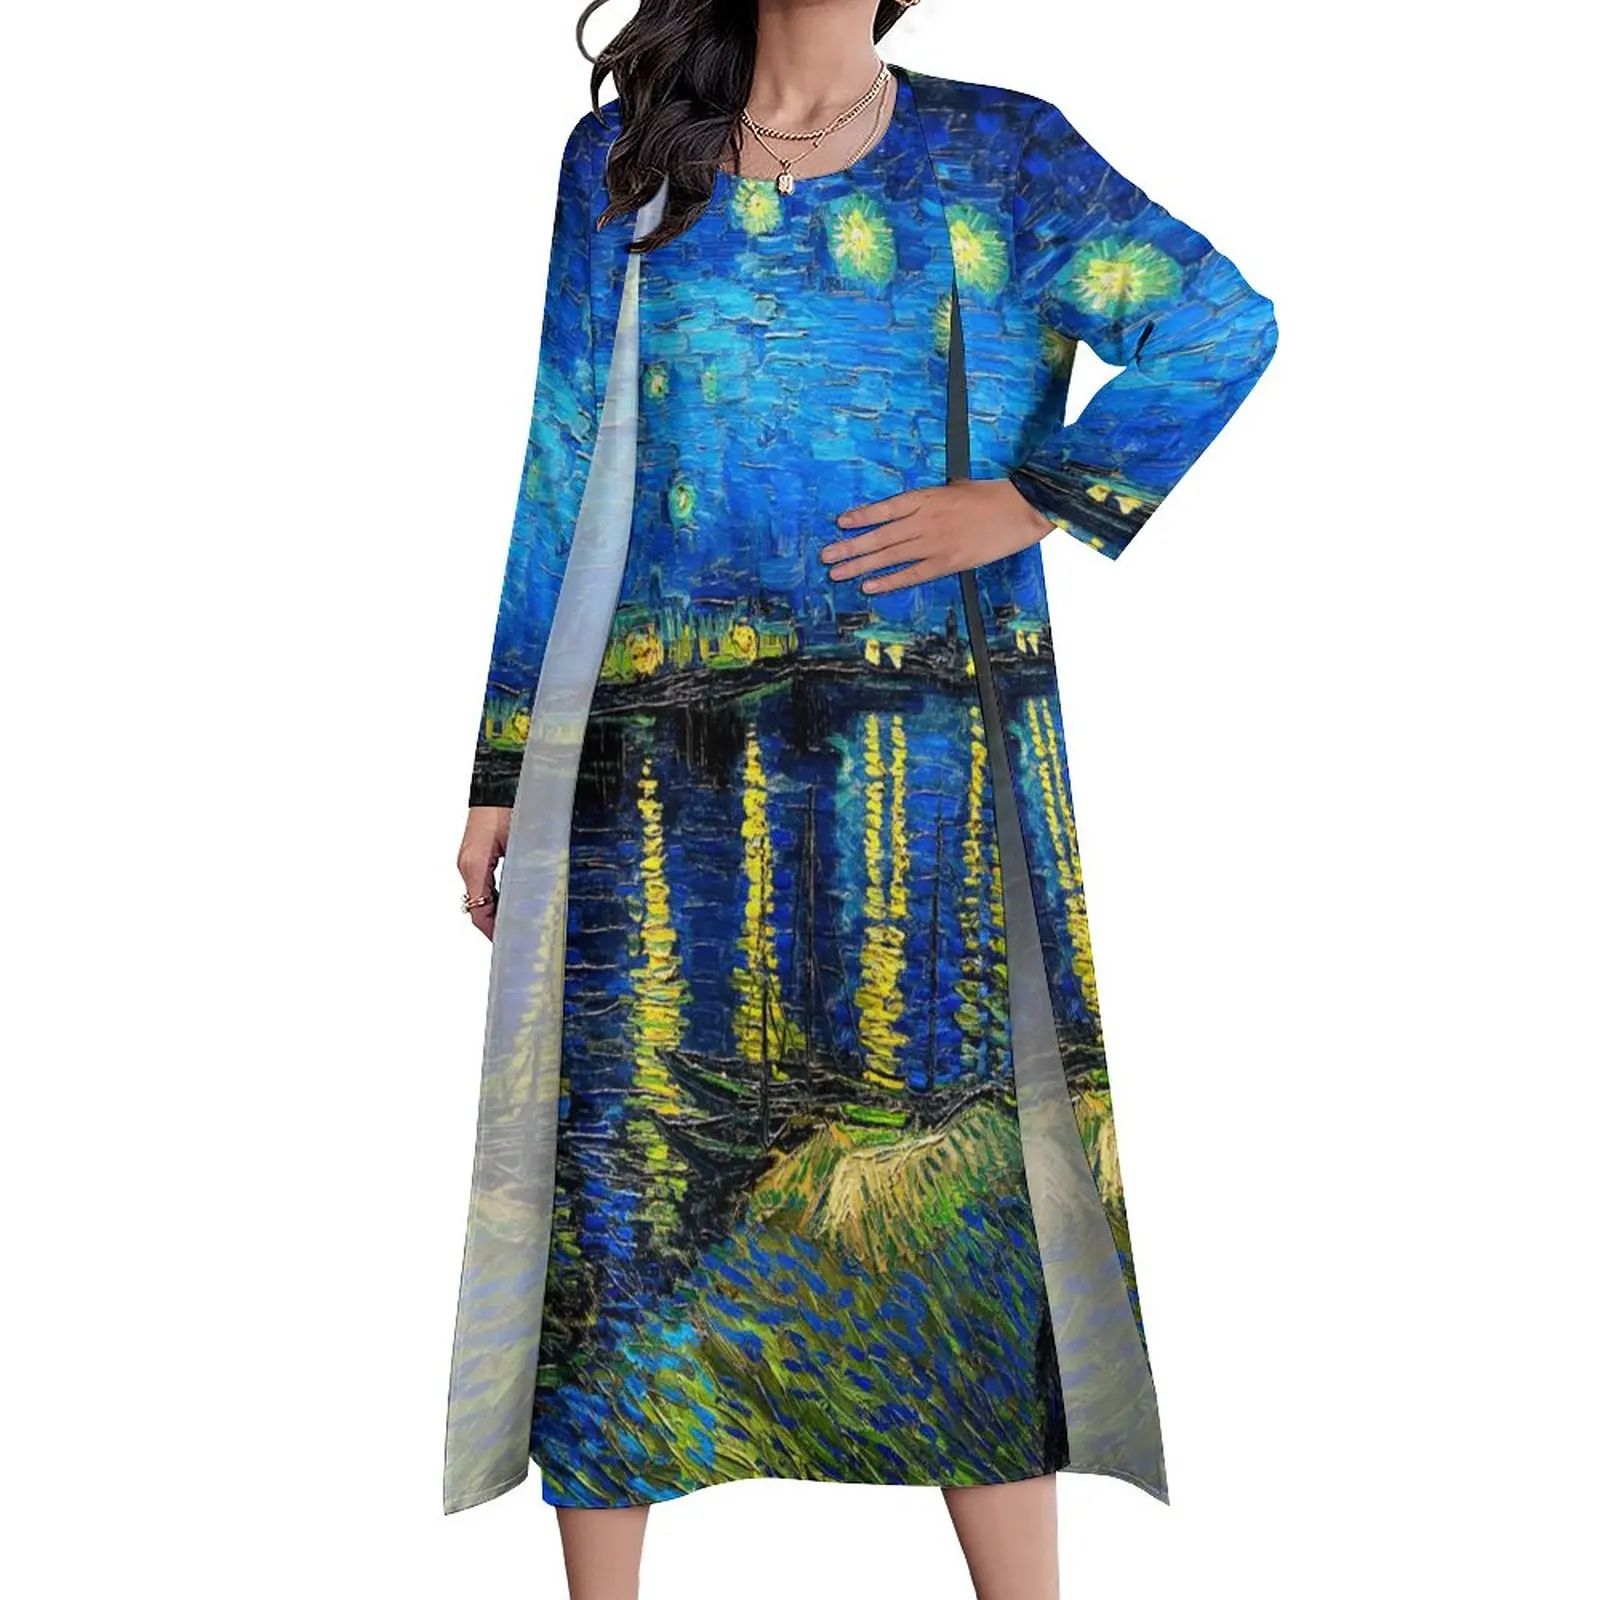 

Van Gogh Dress Two-Piece Starry Night Over The Rhone Street Style Bohemia Long Dresses Female Vintage Maxi Dress Gift